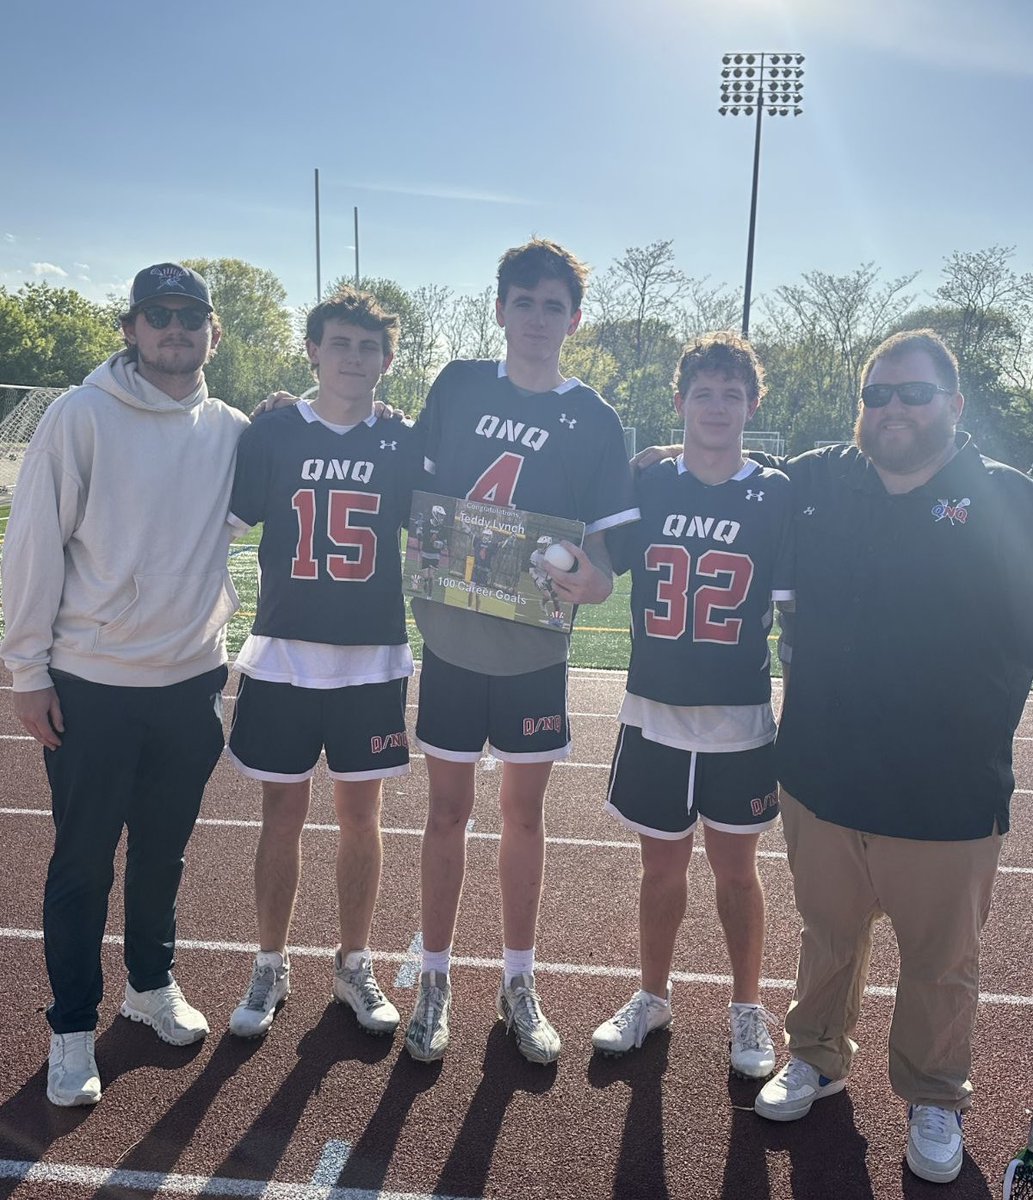 Boys Lacrosse FINAL Quincy/NQ- 14 Somerville- 7 Congrats to QHS senior, Teddy Lynch on scoring his 100th career goal in the victory!! @sports_ledger @BostonHeraldHS @GlobeSchools